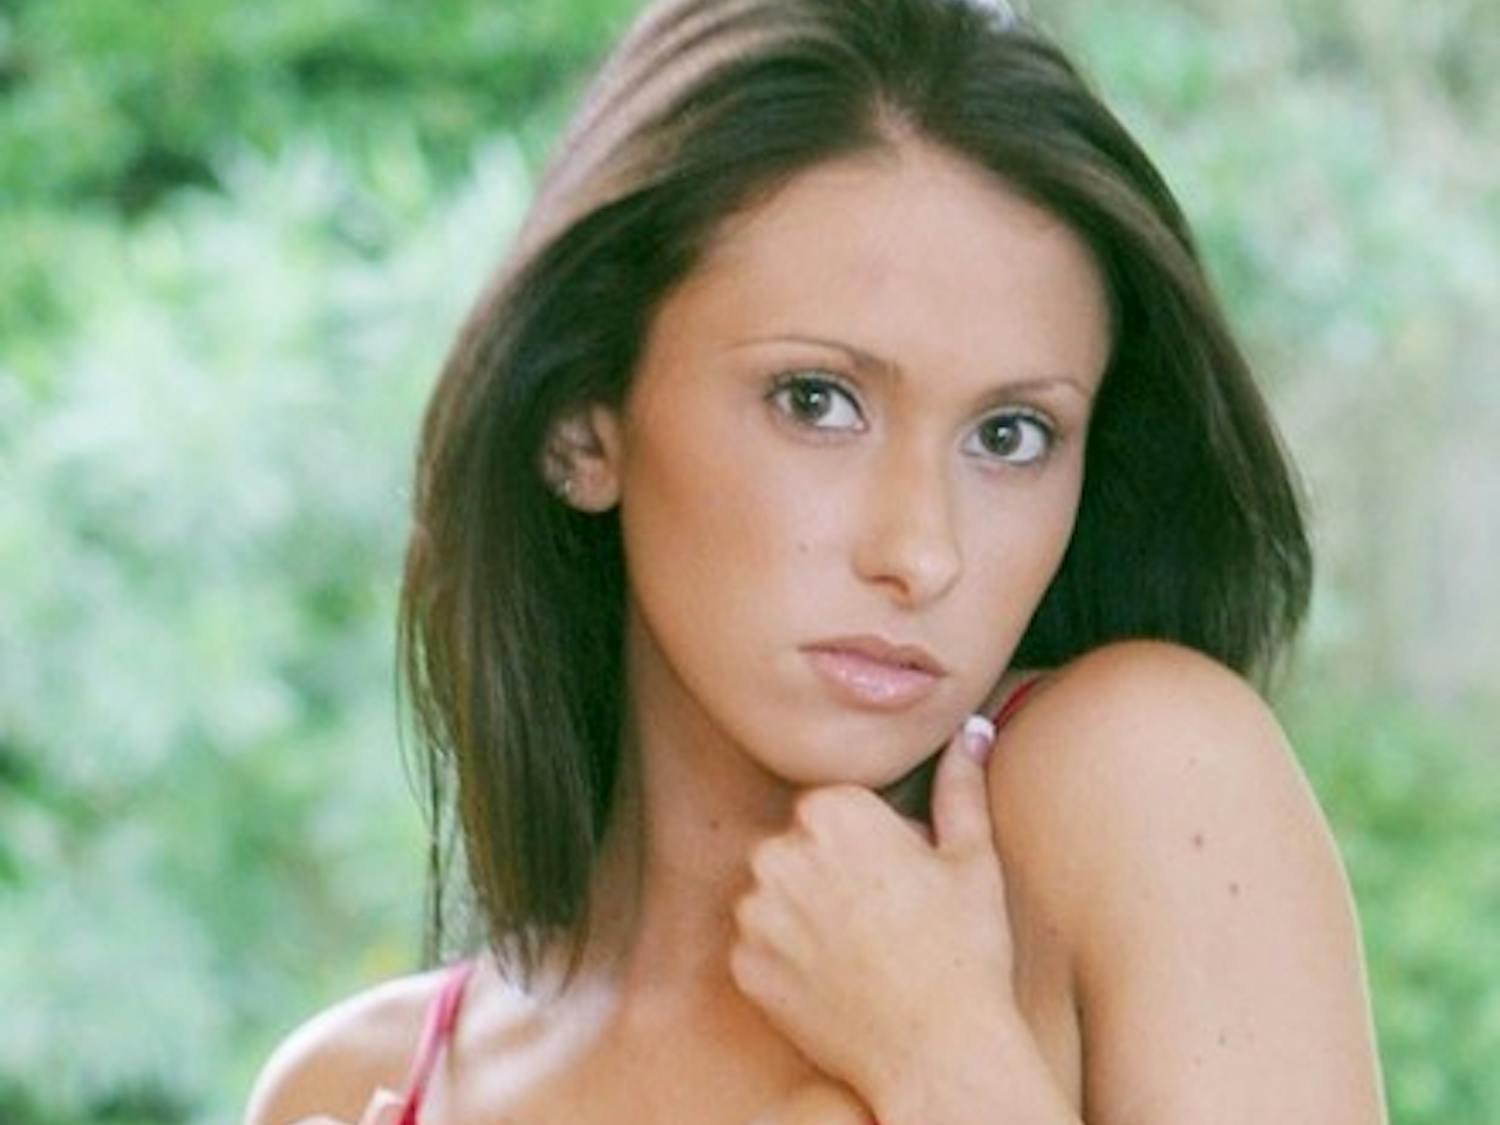 Model Jenn Sterger, a student at Florida State University with 95 Facebook.com friends at Dartmouth, will give a half-hour presentation on her life.